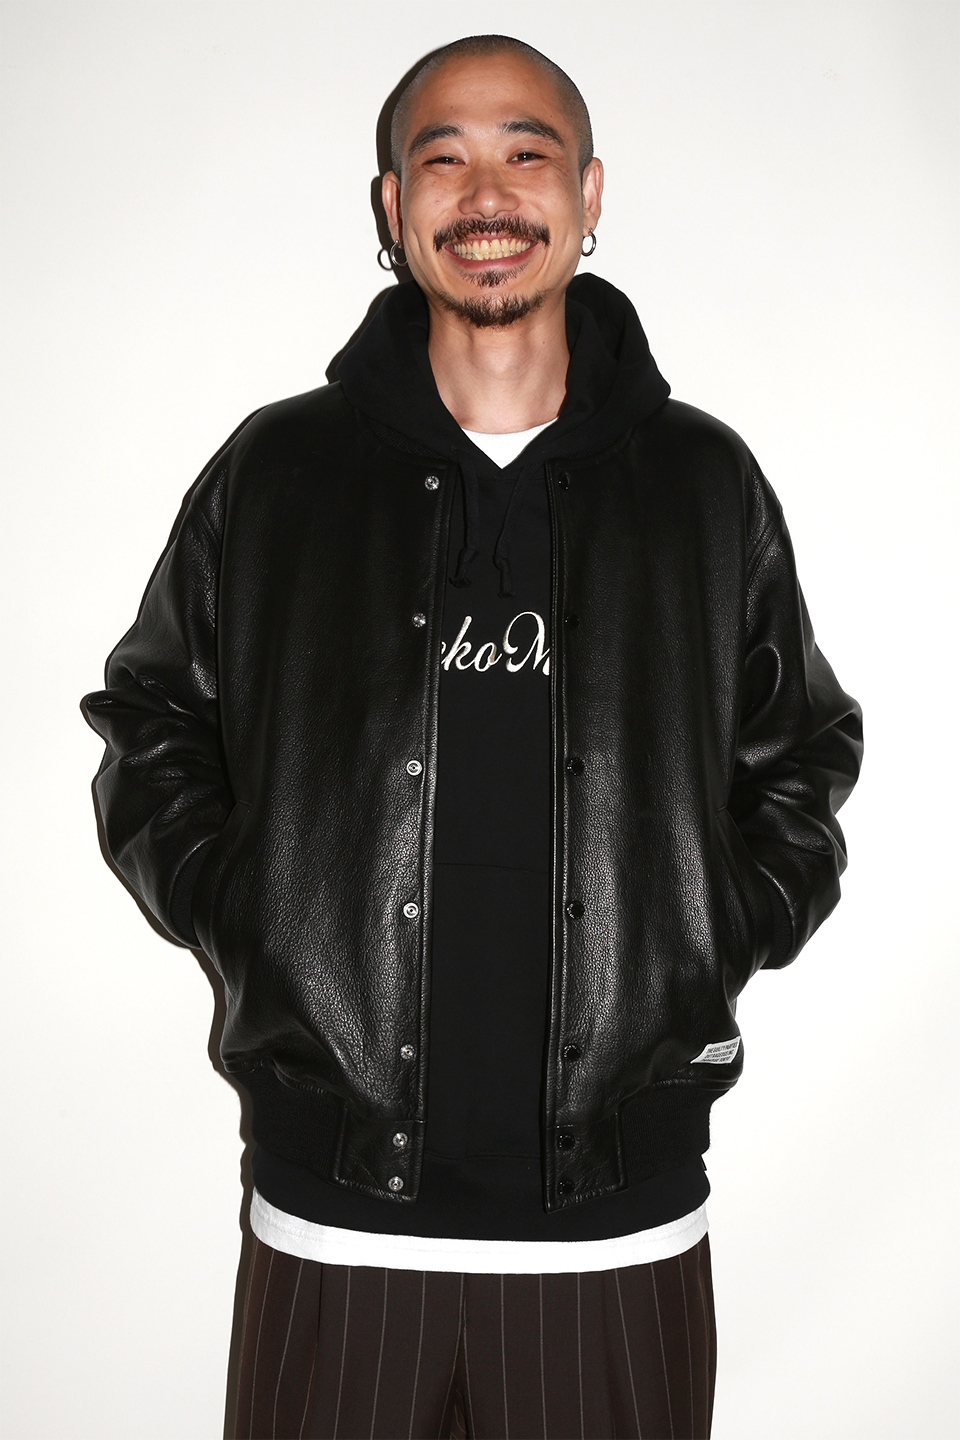 SEAL限定商品】 JACKET LEATHER maria wacko ワコマリア 黒 23AW ...